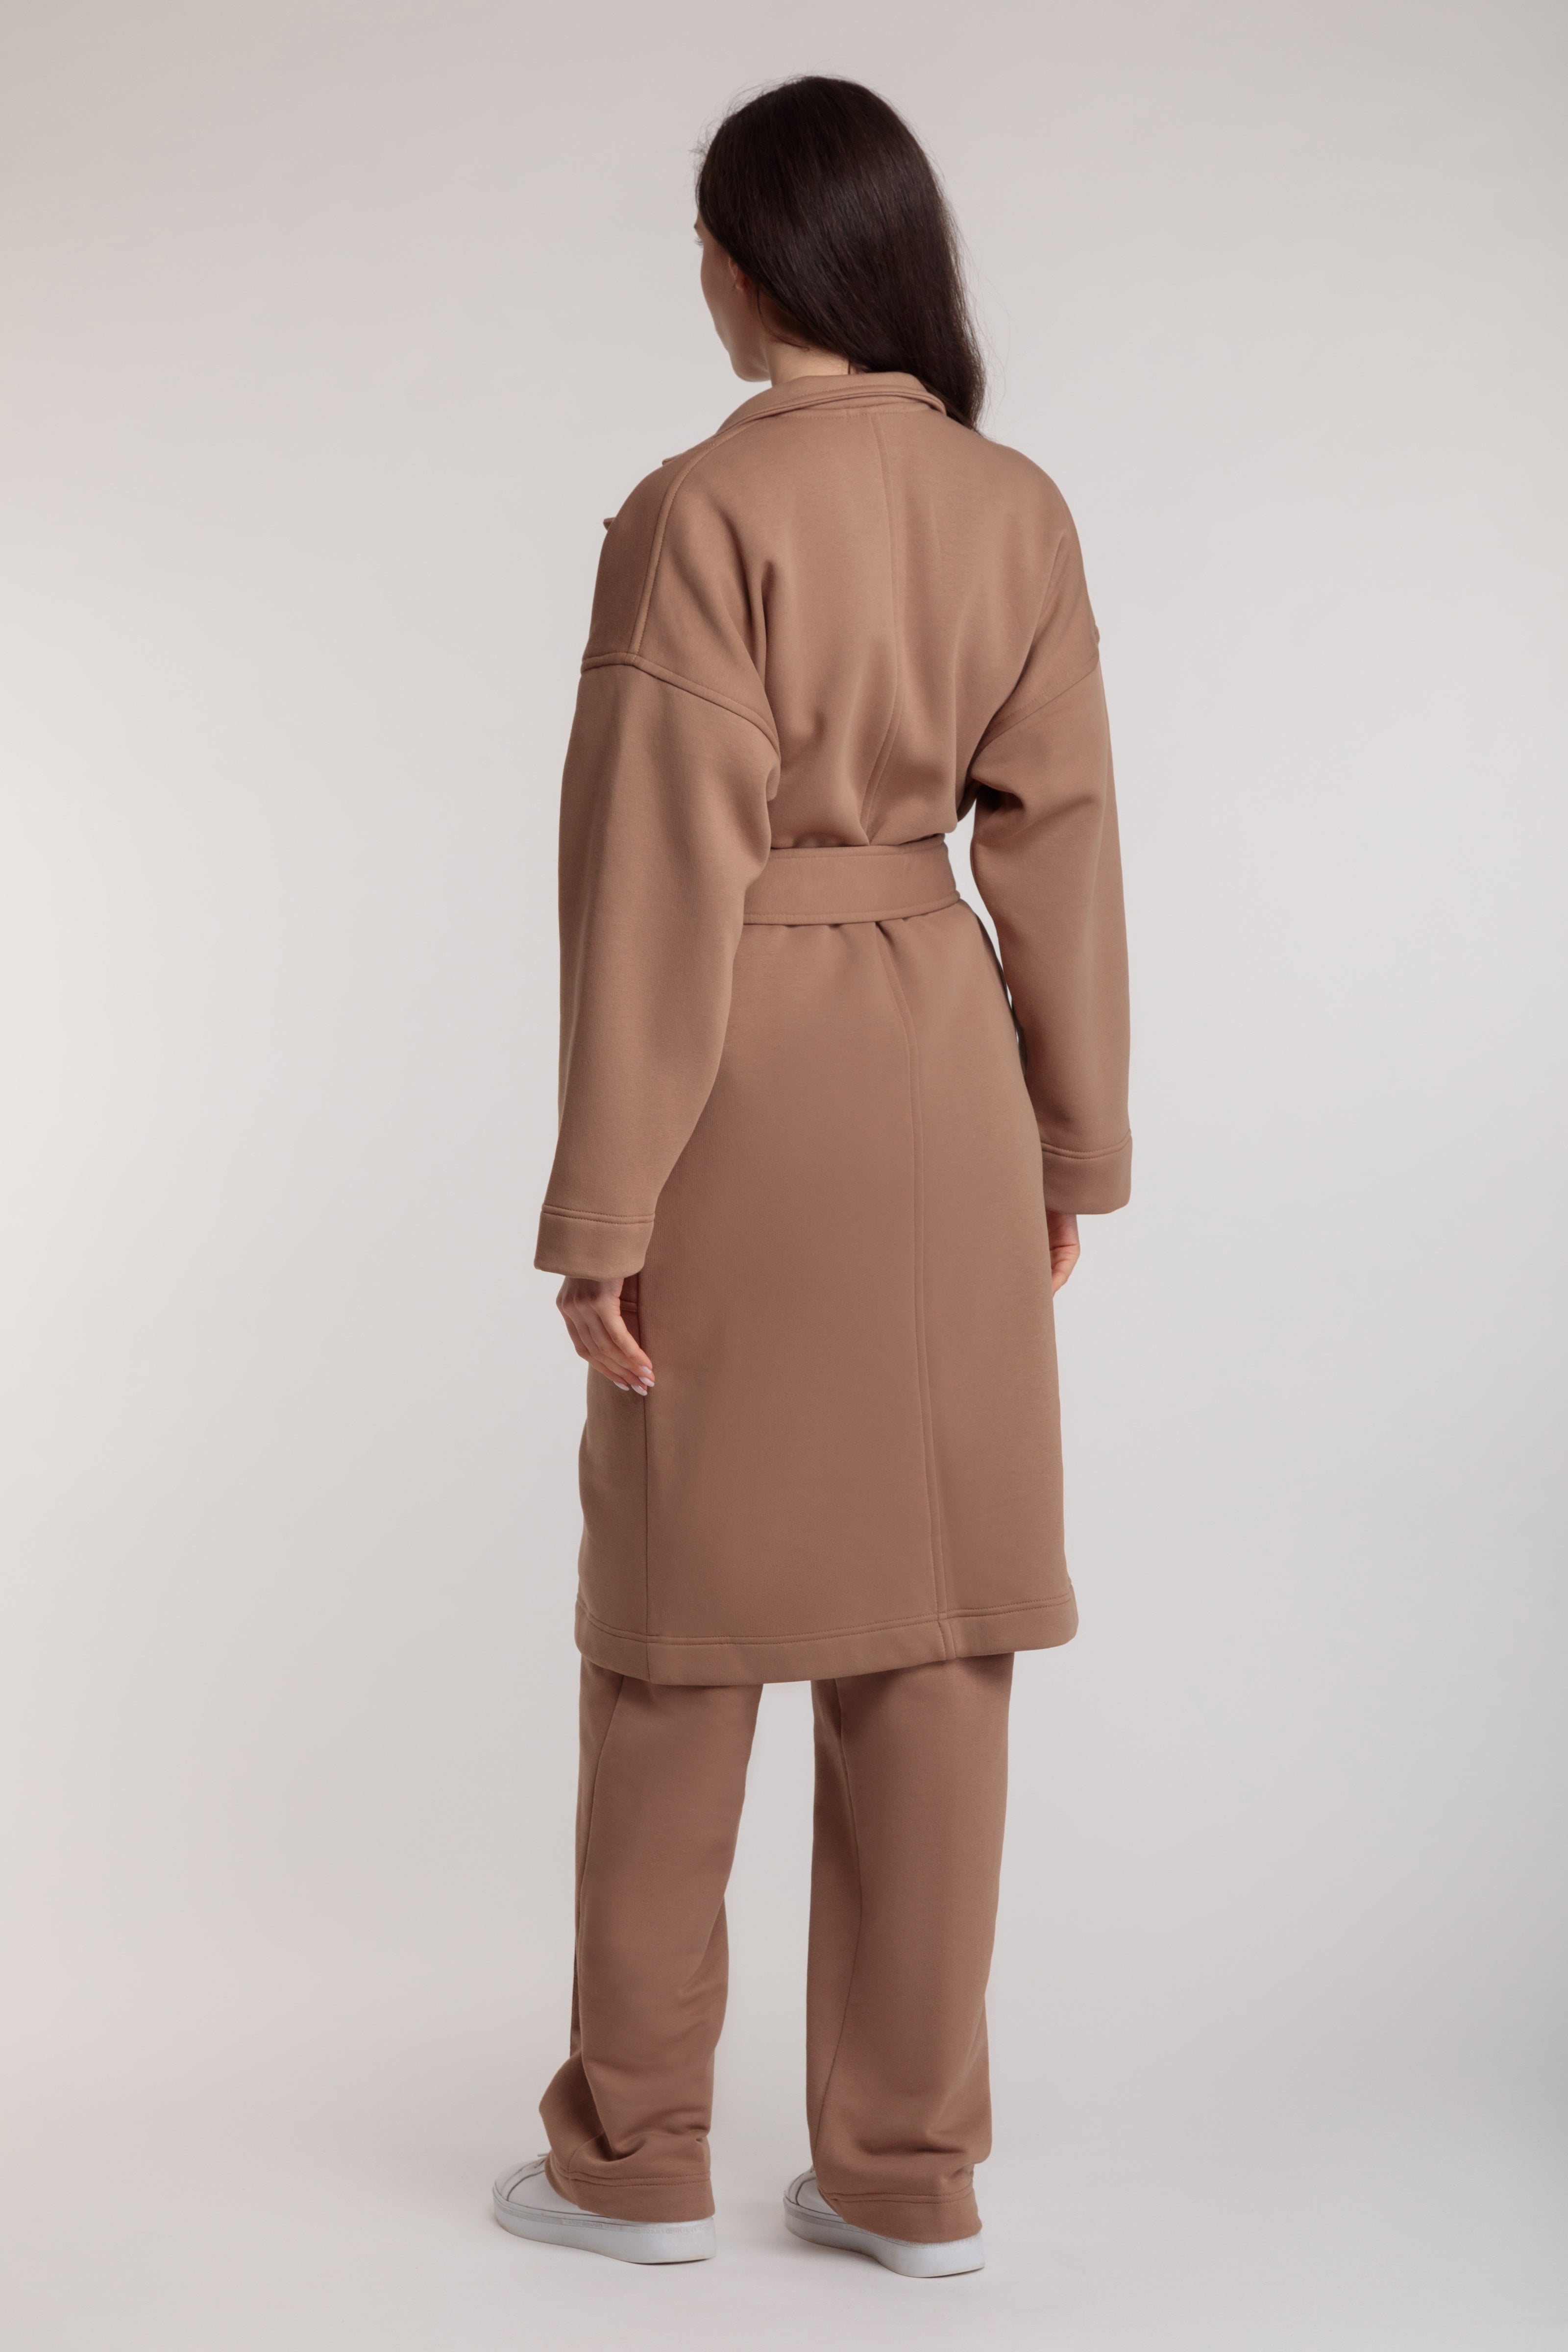 Long cotton cardigan-coat in beige color with a wrap belt and pockets